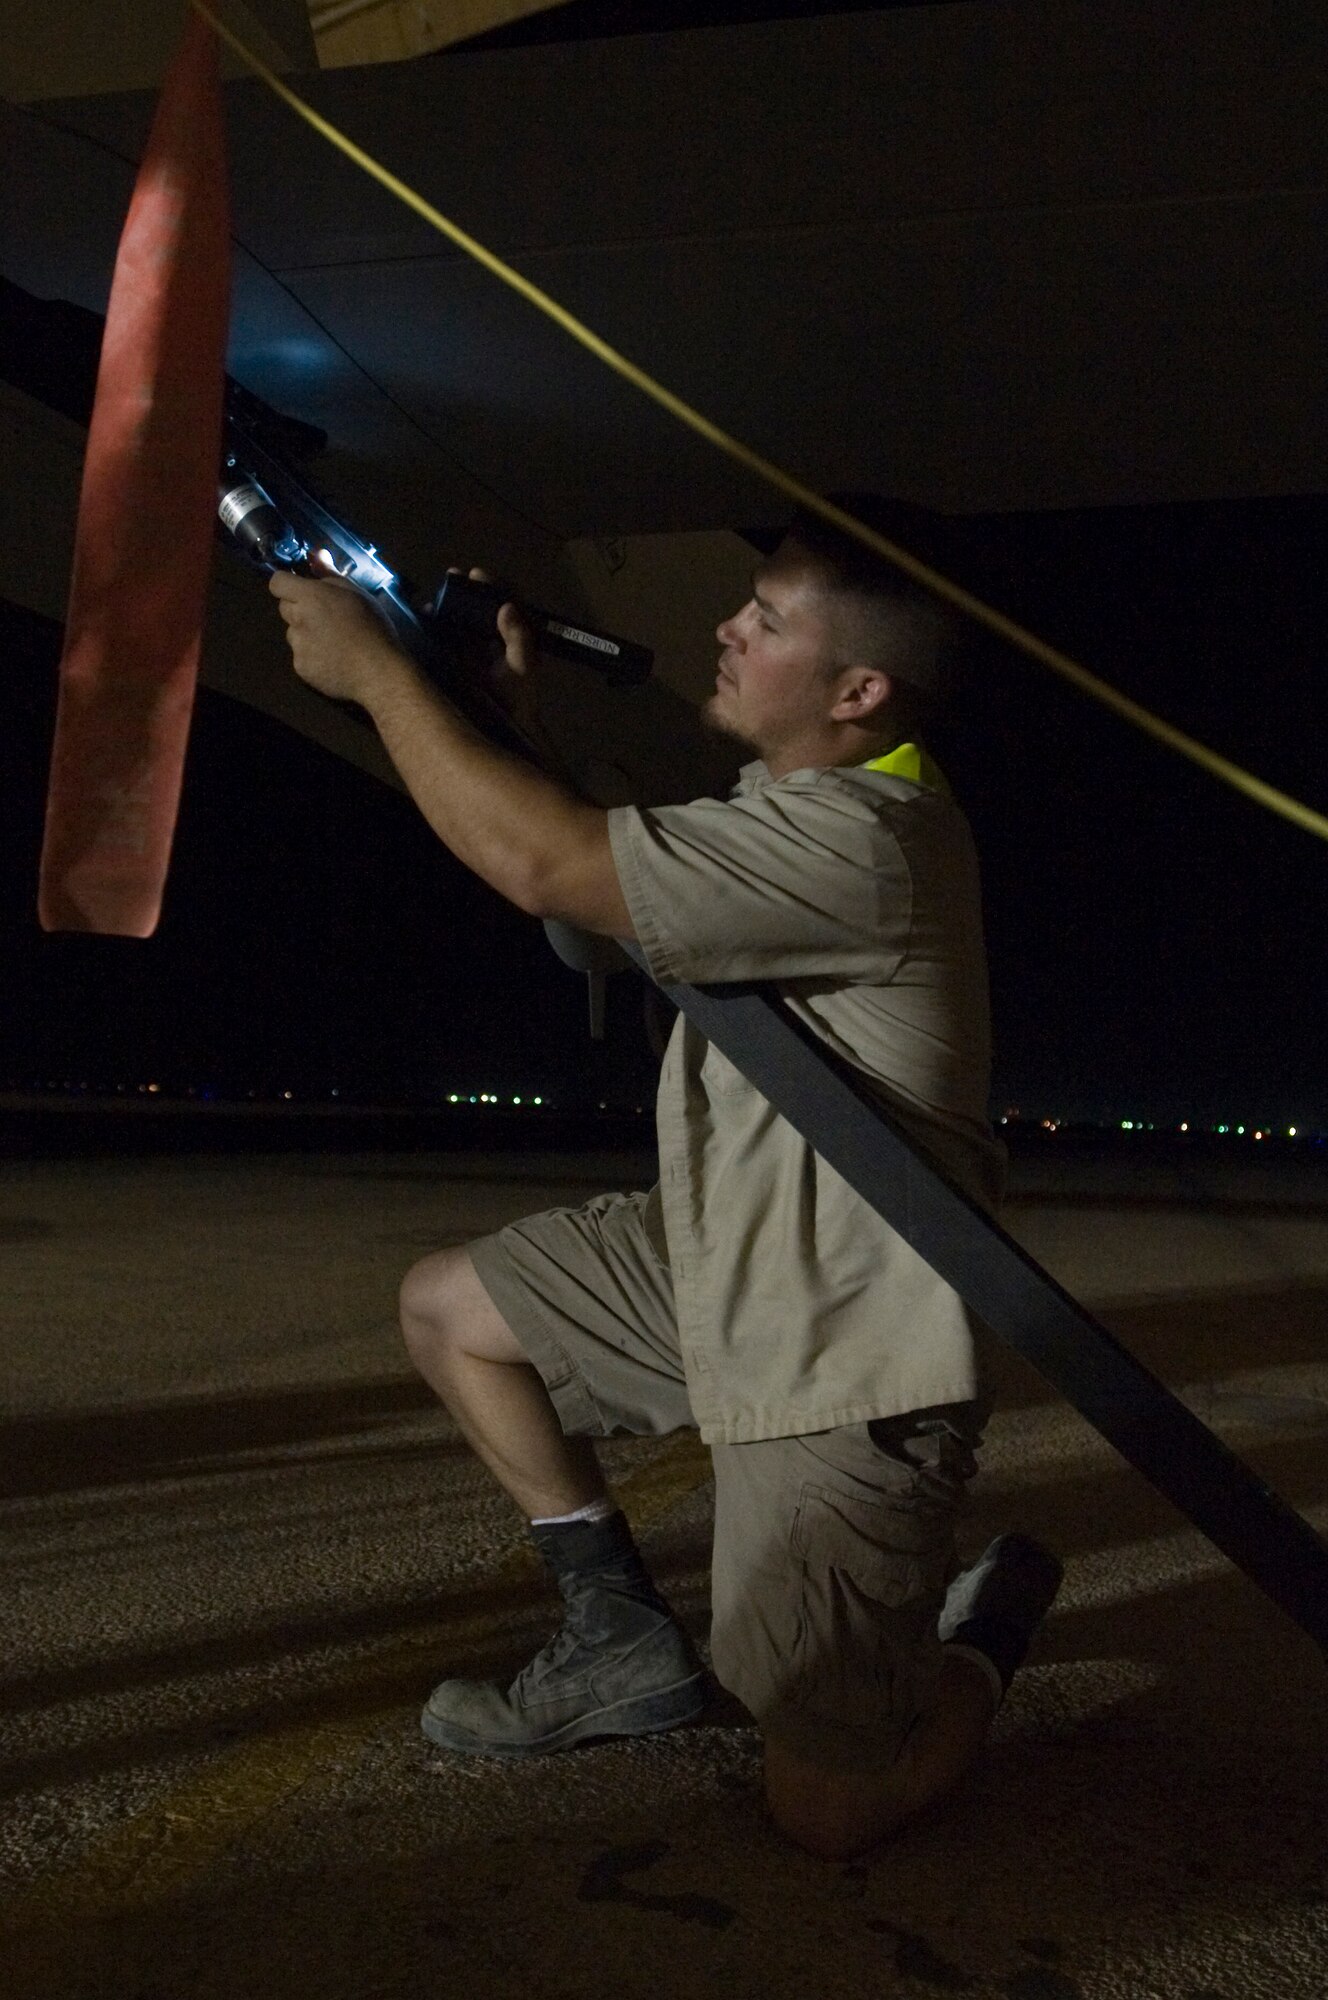 ALI BASE, Iraq -- Adam Wilson, Detachment 1 46th Expeditionary Reconnaissance Attack Squadron, performs post maintenance on a MQ-1B Predator Sept. 3, 2008. The Predator is a medium-altitude, long-endurance, remotely piloted aircraft. Its mission here is to interdict and conduct armed reconnaissance against critical and perishable targets in support of the Global War on Terrorism. (U.S. Air Force photo/Airman 1st Class Christopher Griffin)